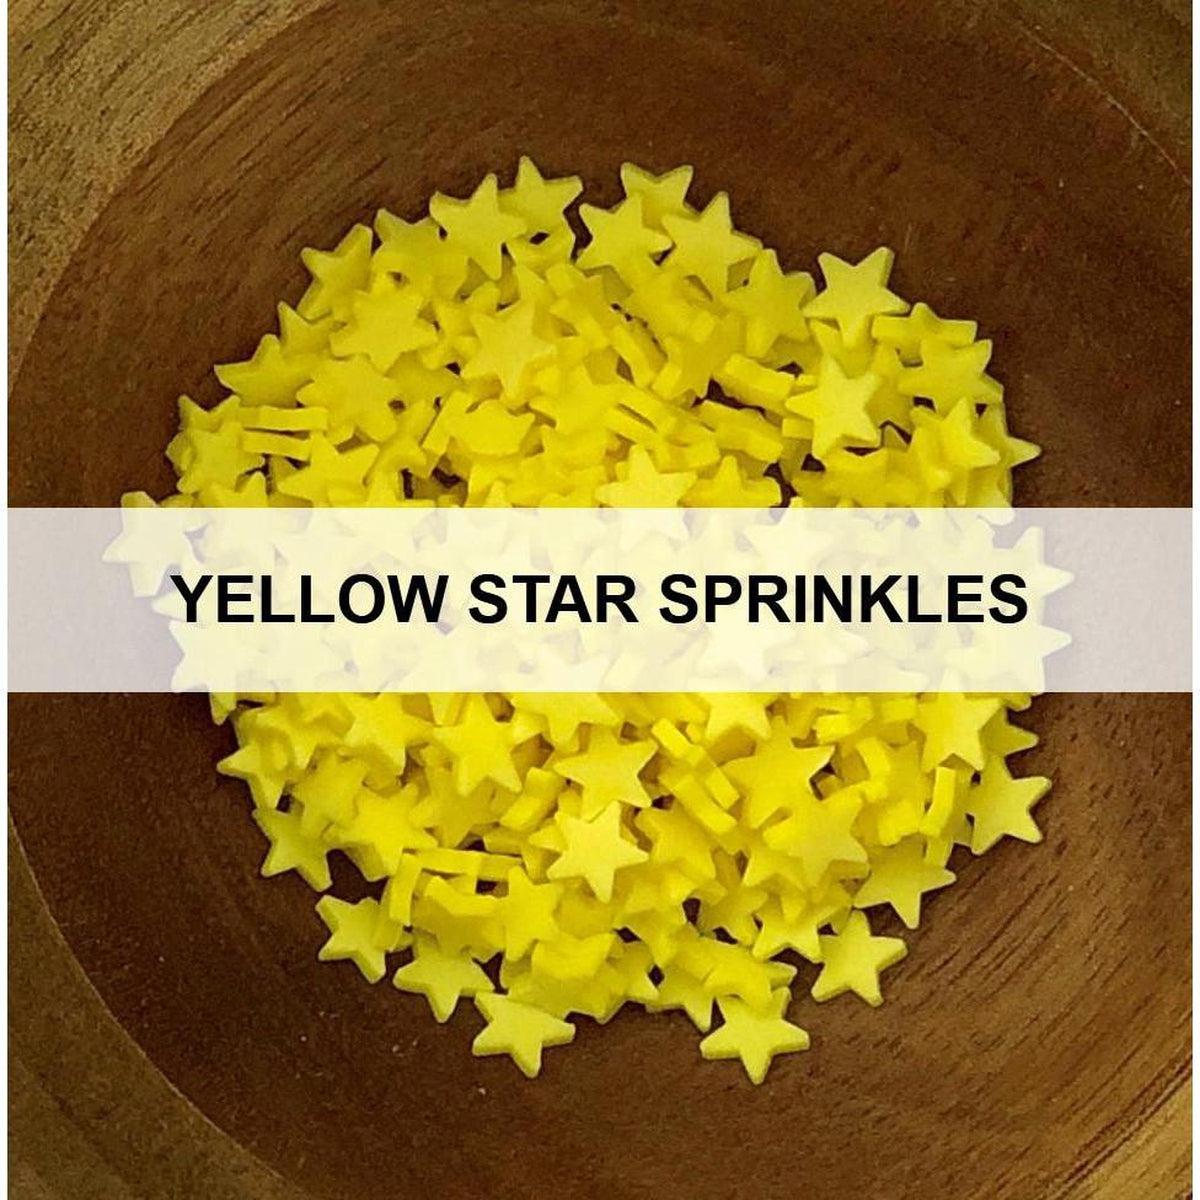 Yellow Star Sprinkles by Kat Scrappiness - Kat Scrappiness